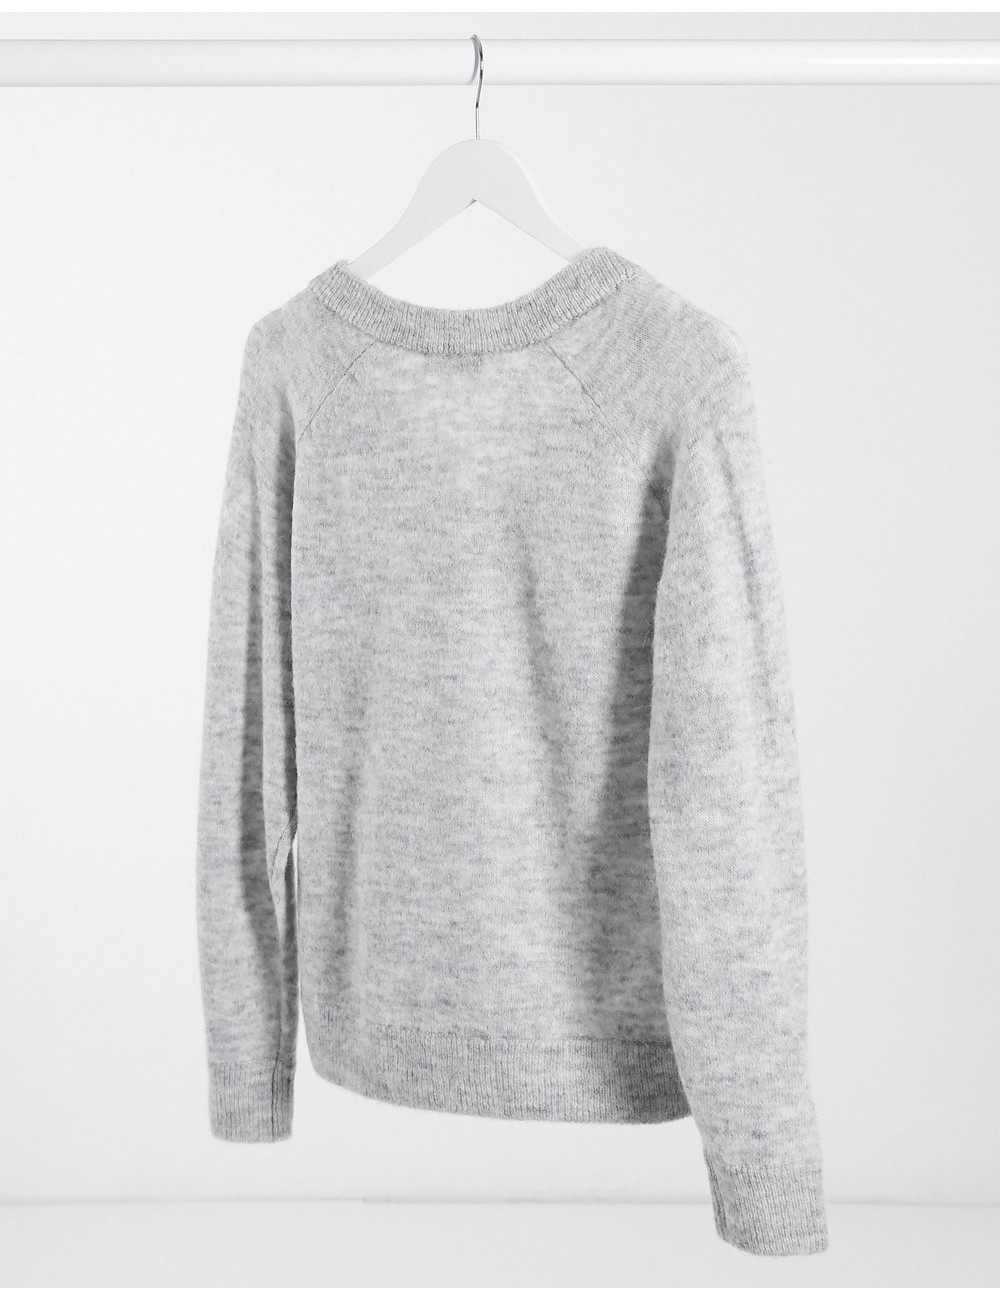 Selected Femme jumper with...